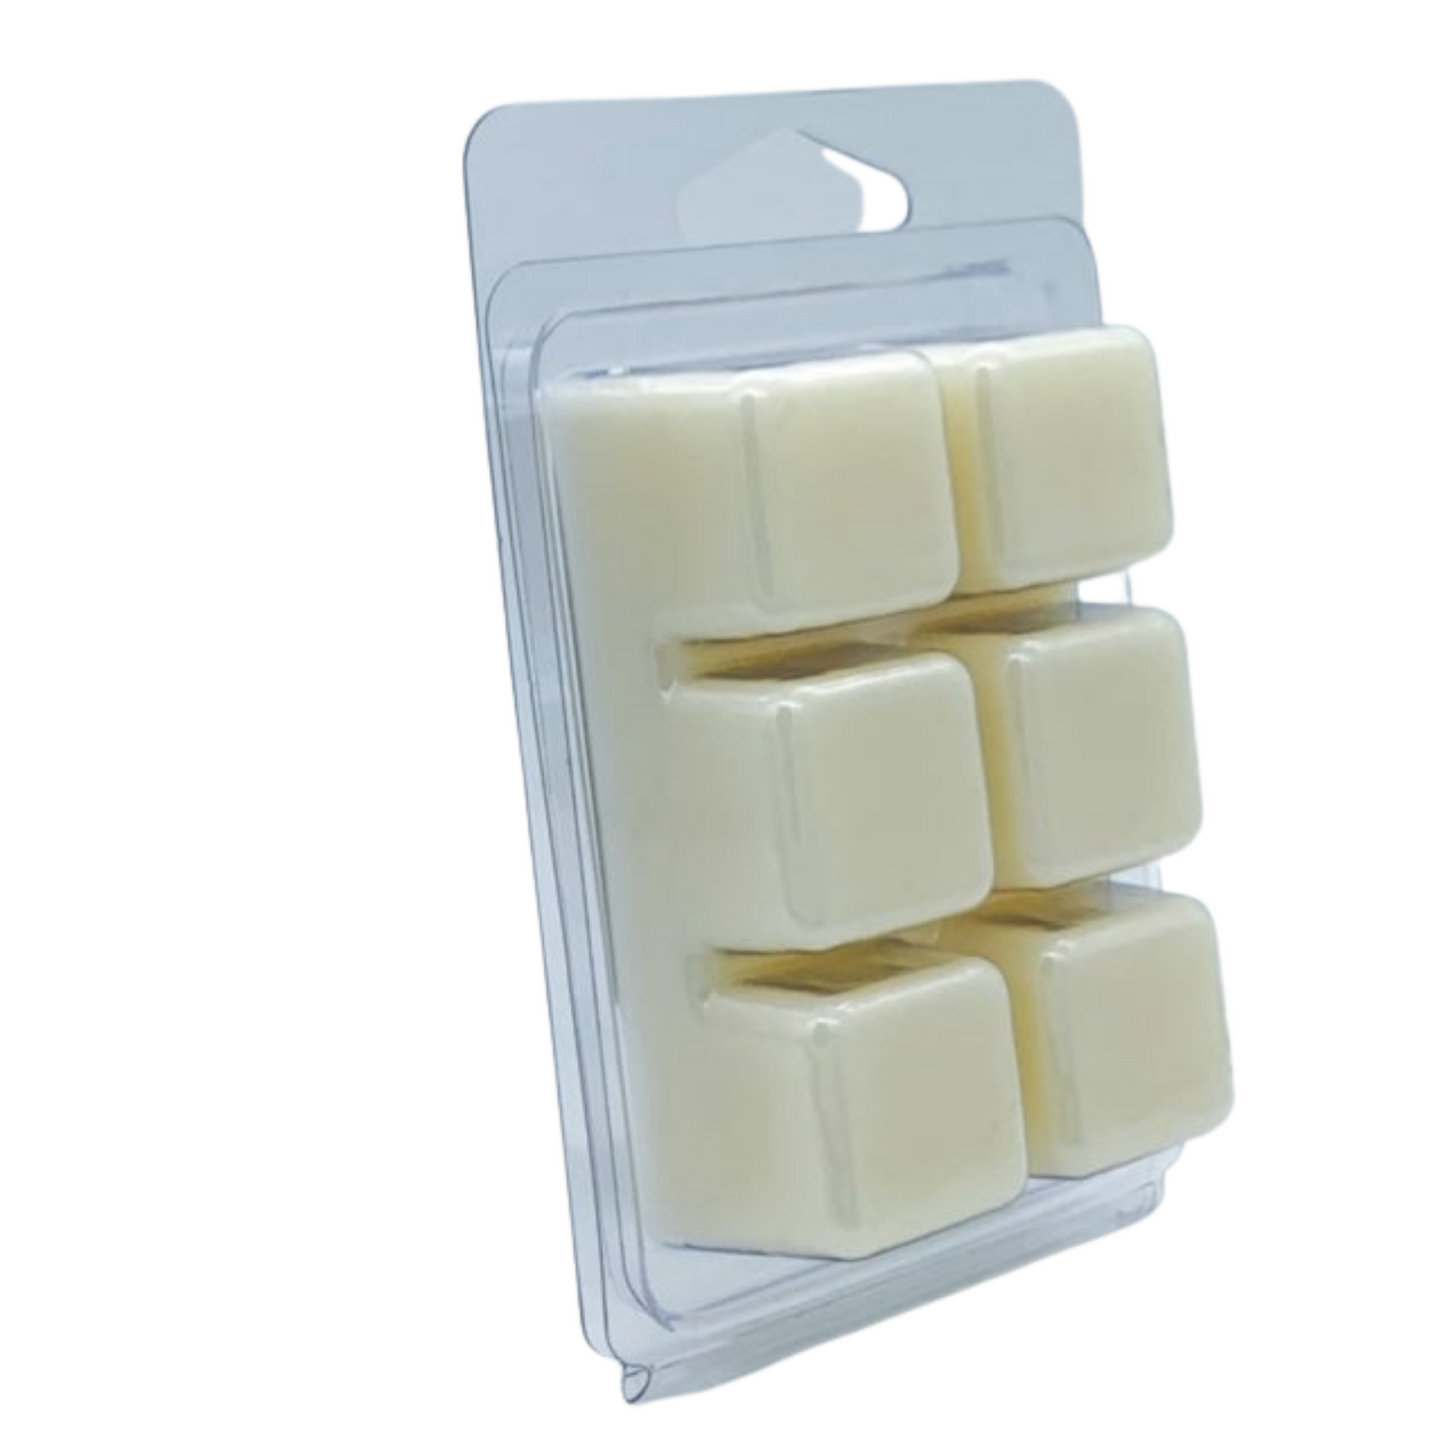 COCONUT SOLEIL | Scented Soy Wax Melts